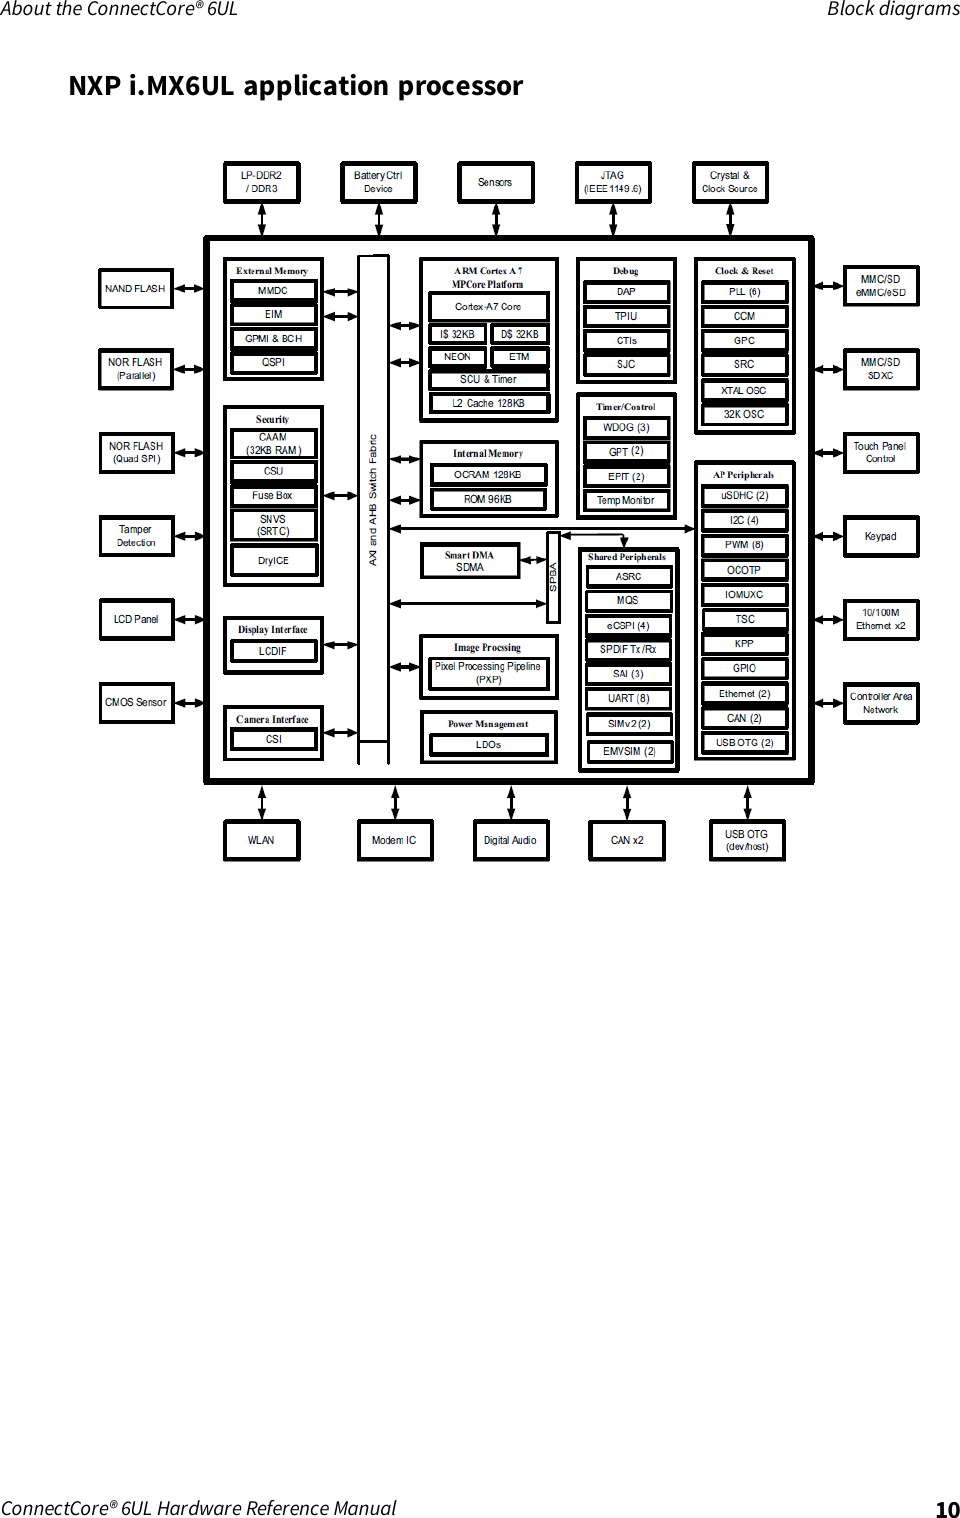 About the ConnectCore® 6UL Block diagramsConnectCore® 6UL Hardware Reference Manual 10NXP i.MX6UL application processor